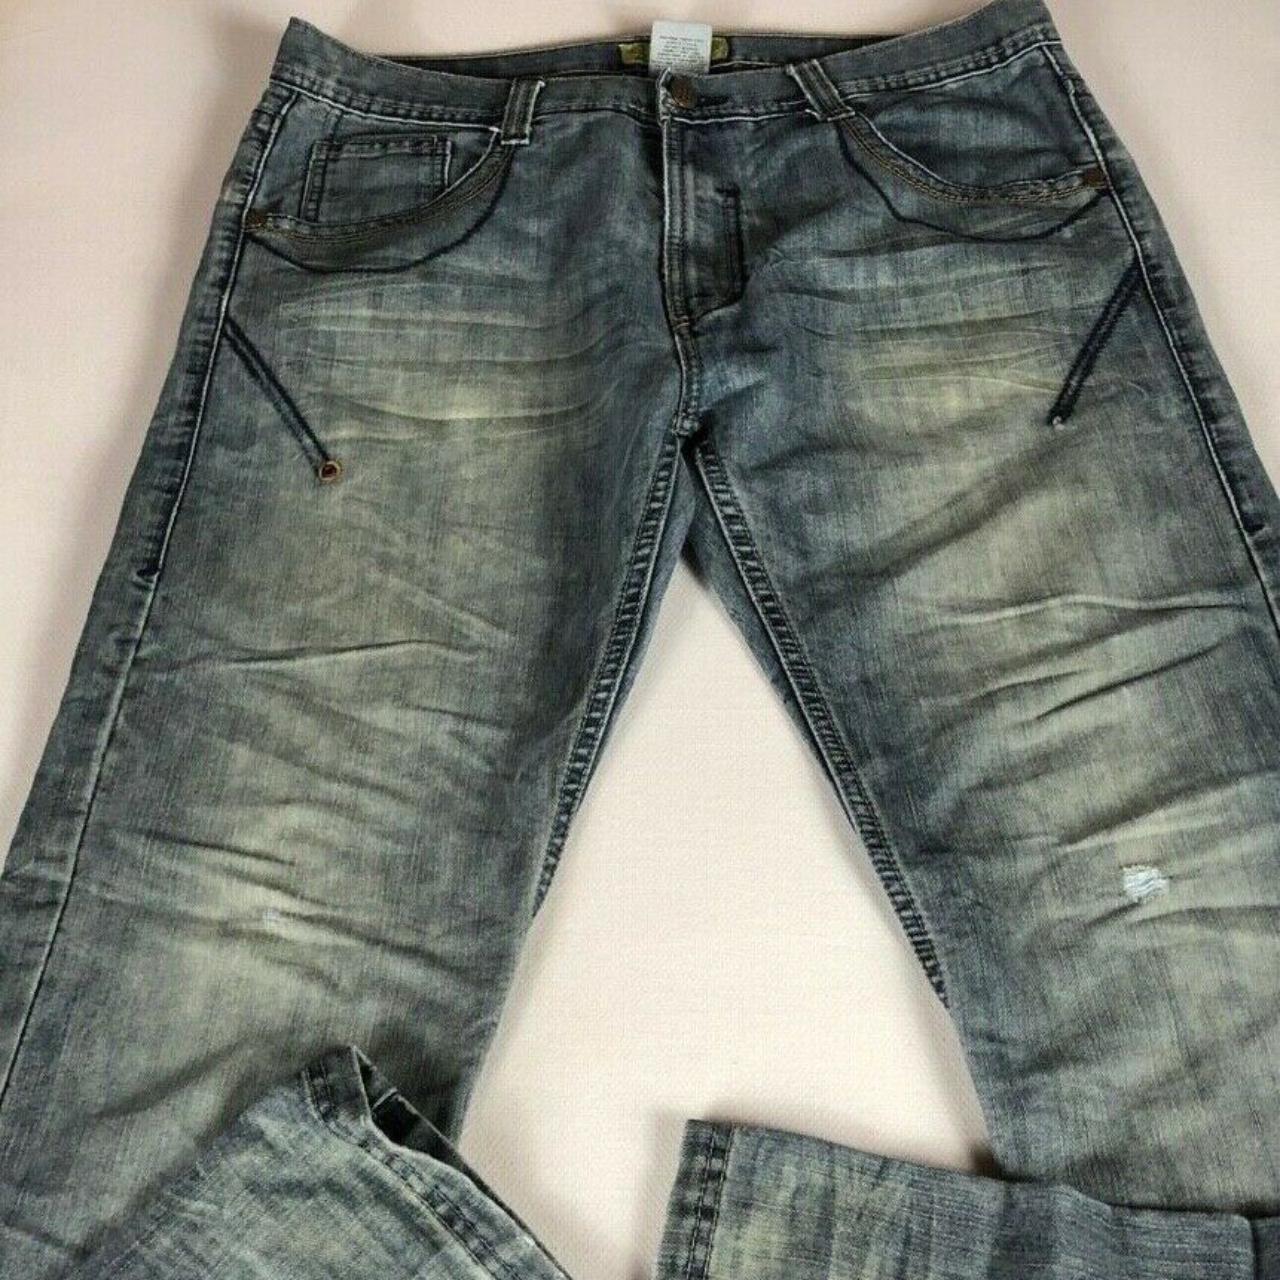 Product Image 1 - Oil & Vinny Jeans Mens